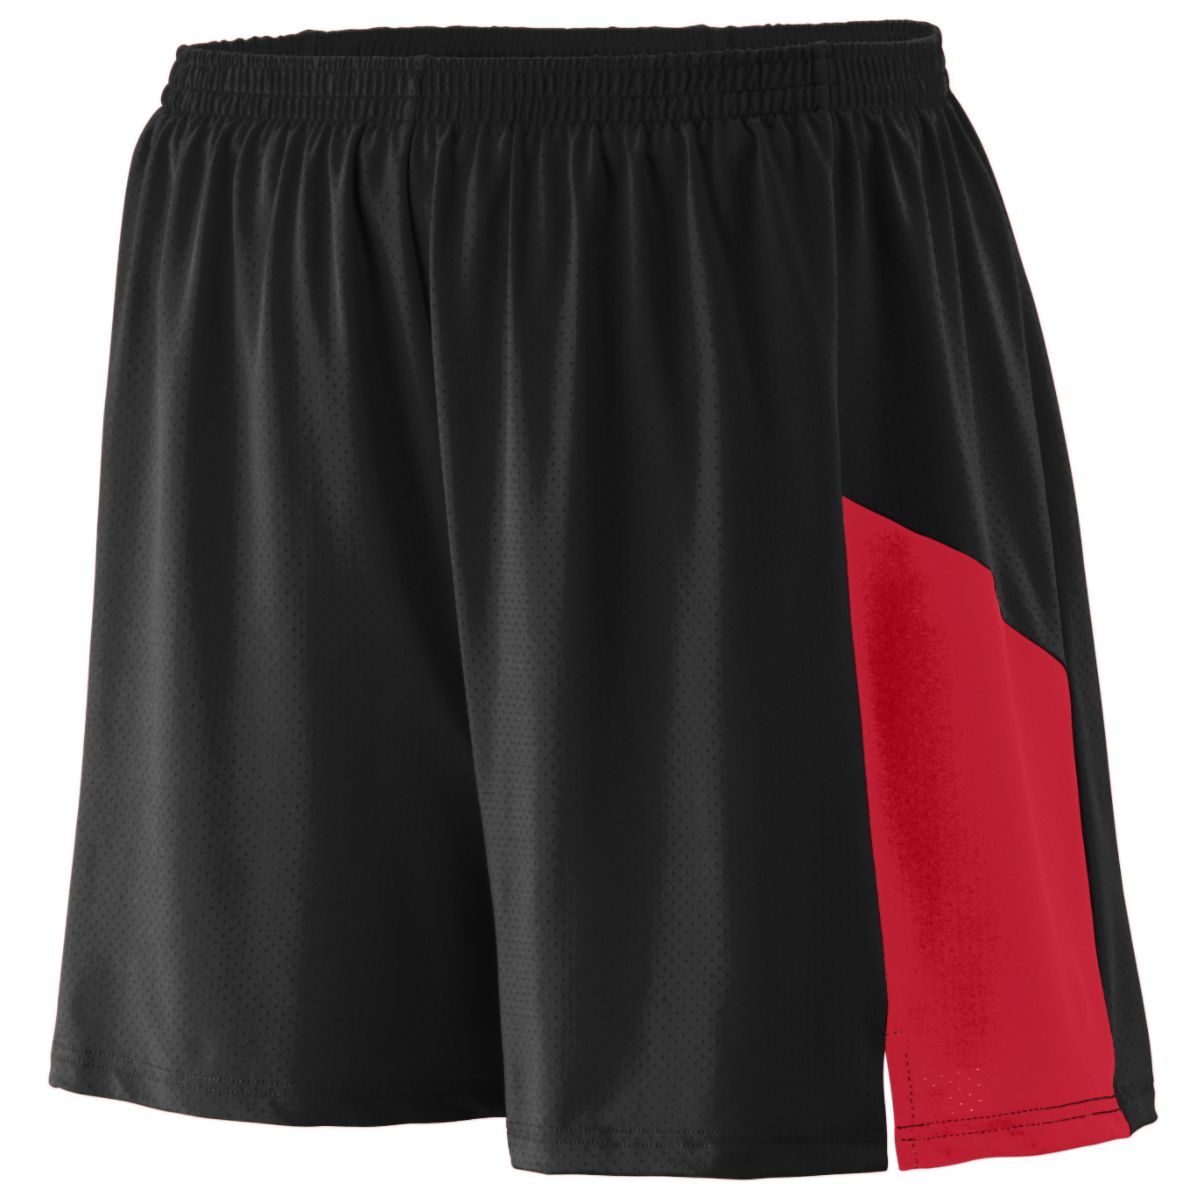 Augusta Sportswear Sprint Shorts in Black/Red  -Part of the Adult, Adult-Shorts, Augusta-Products, Track-Field product lines at KanaleyCreations.com